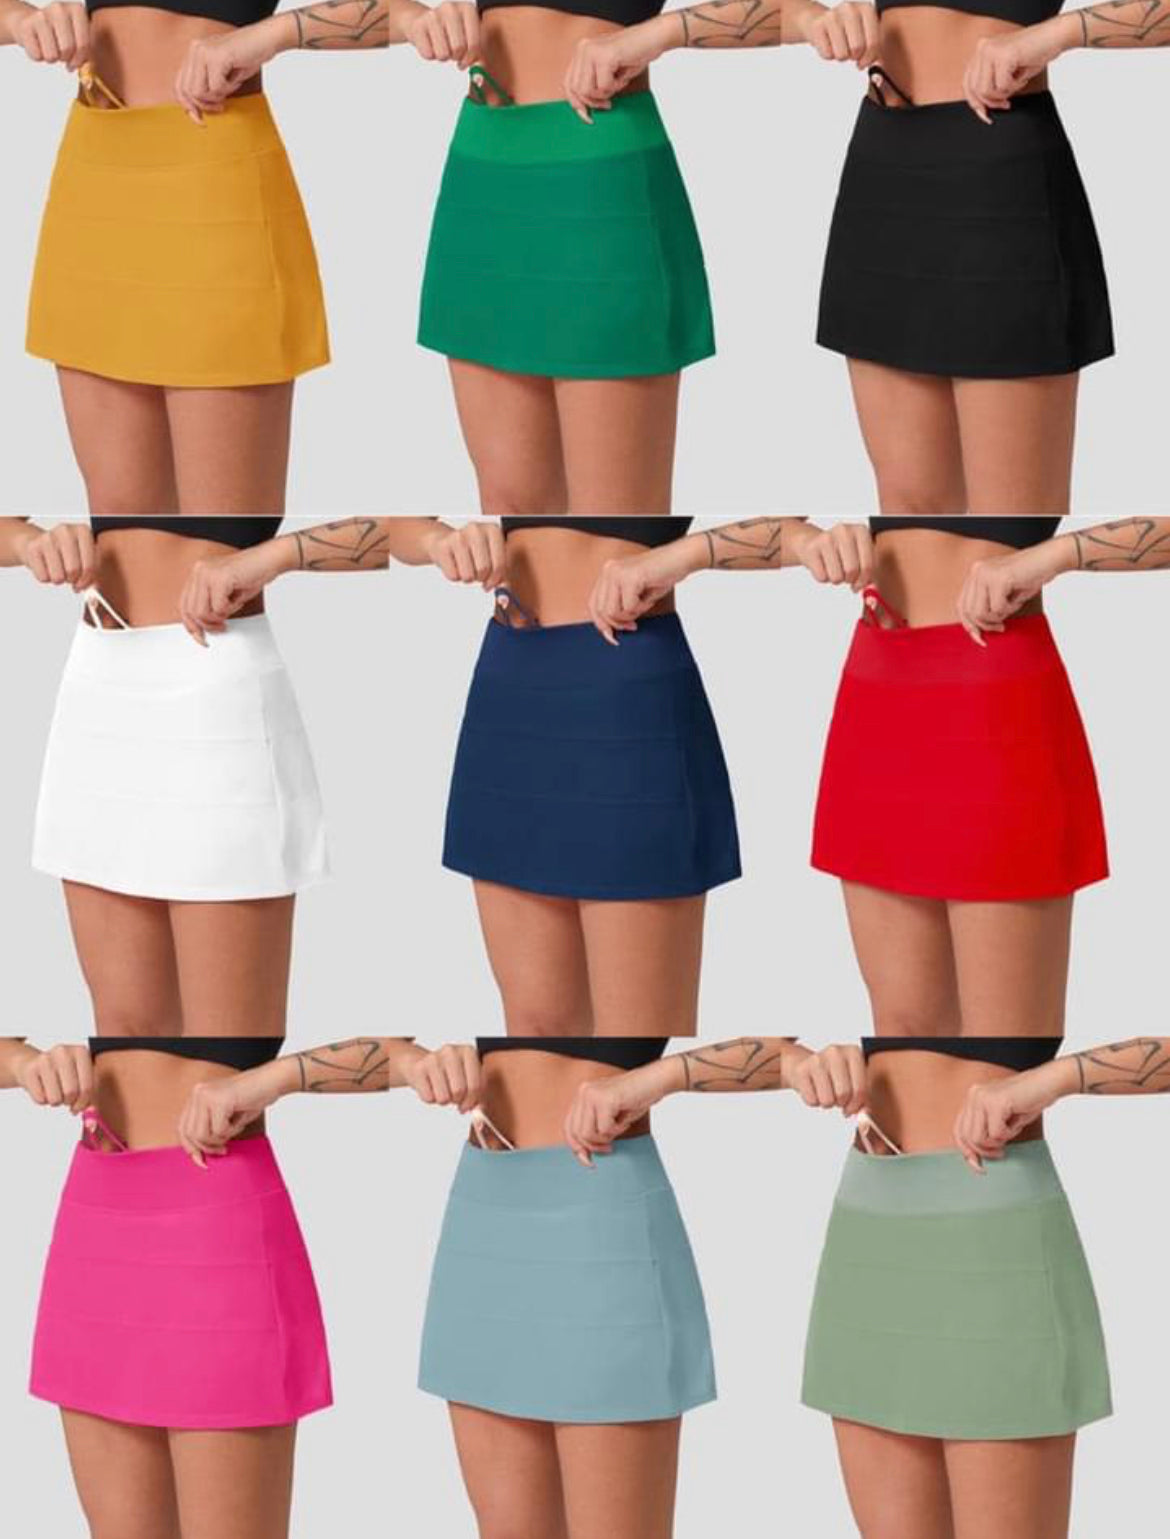 Lu dupe colored skirt